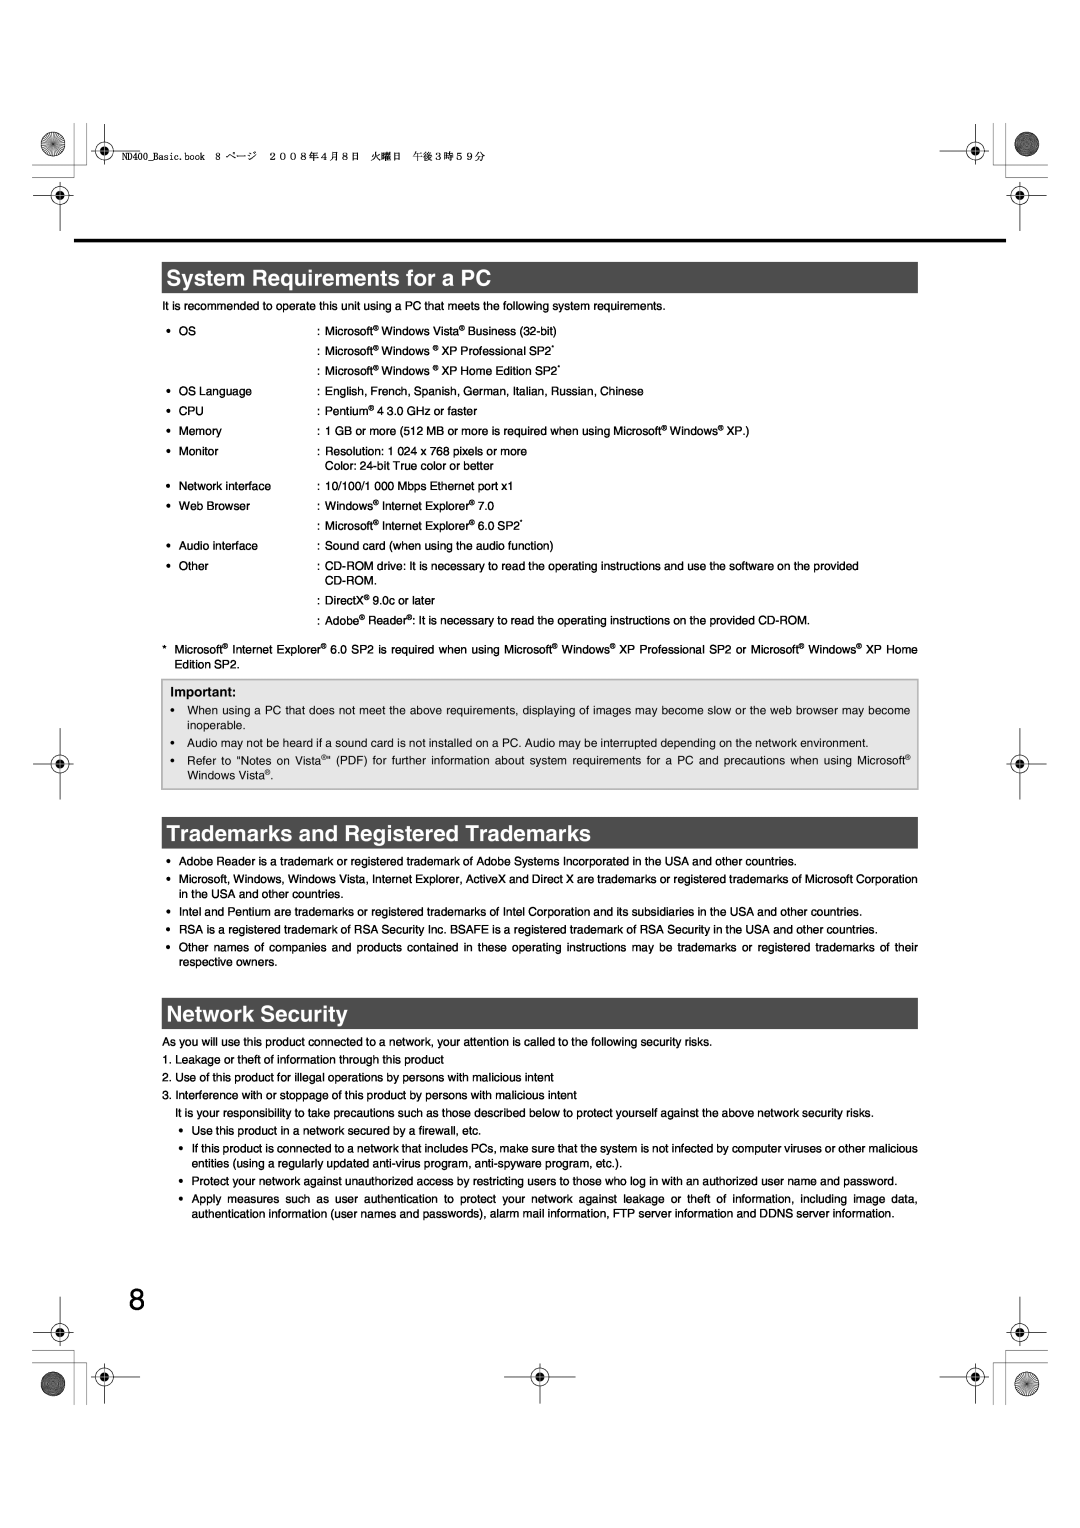 Panasonic WJ-ND400 manual System Requirements for a PC, Trademarks and Registered Trademarks, Network Security 